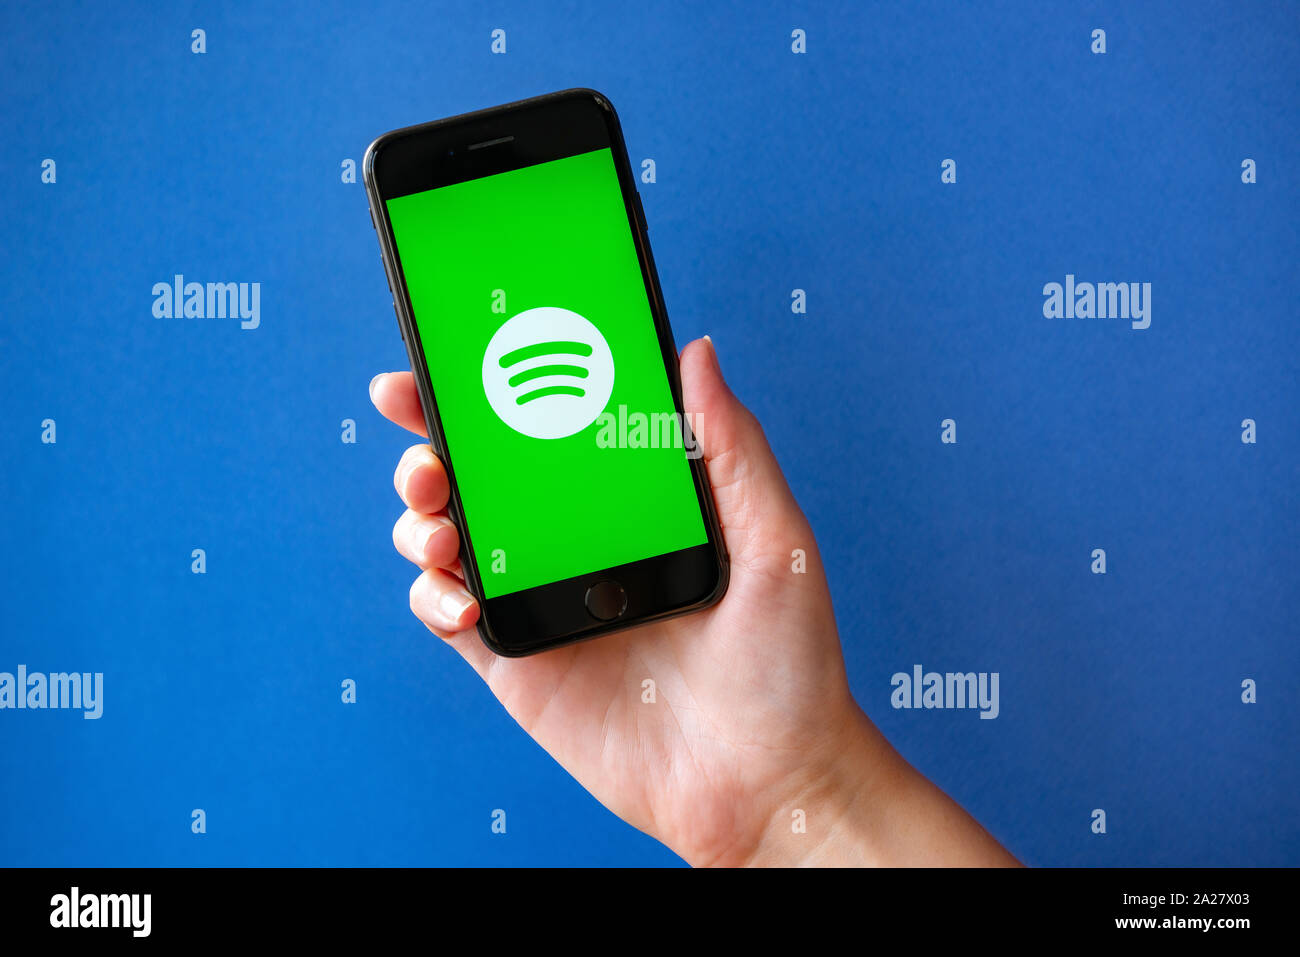 Kyiv, Ukraine - October 1, 2019: Studio shot of hand holding Apple iPhone 8 with Spotify logotype on a screen. Isolated on a blue paper background. Stock Photo